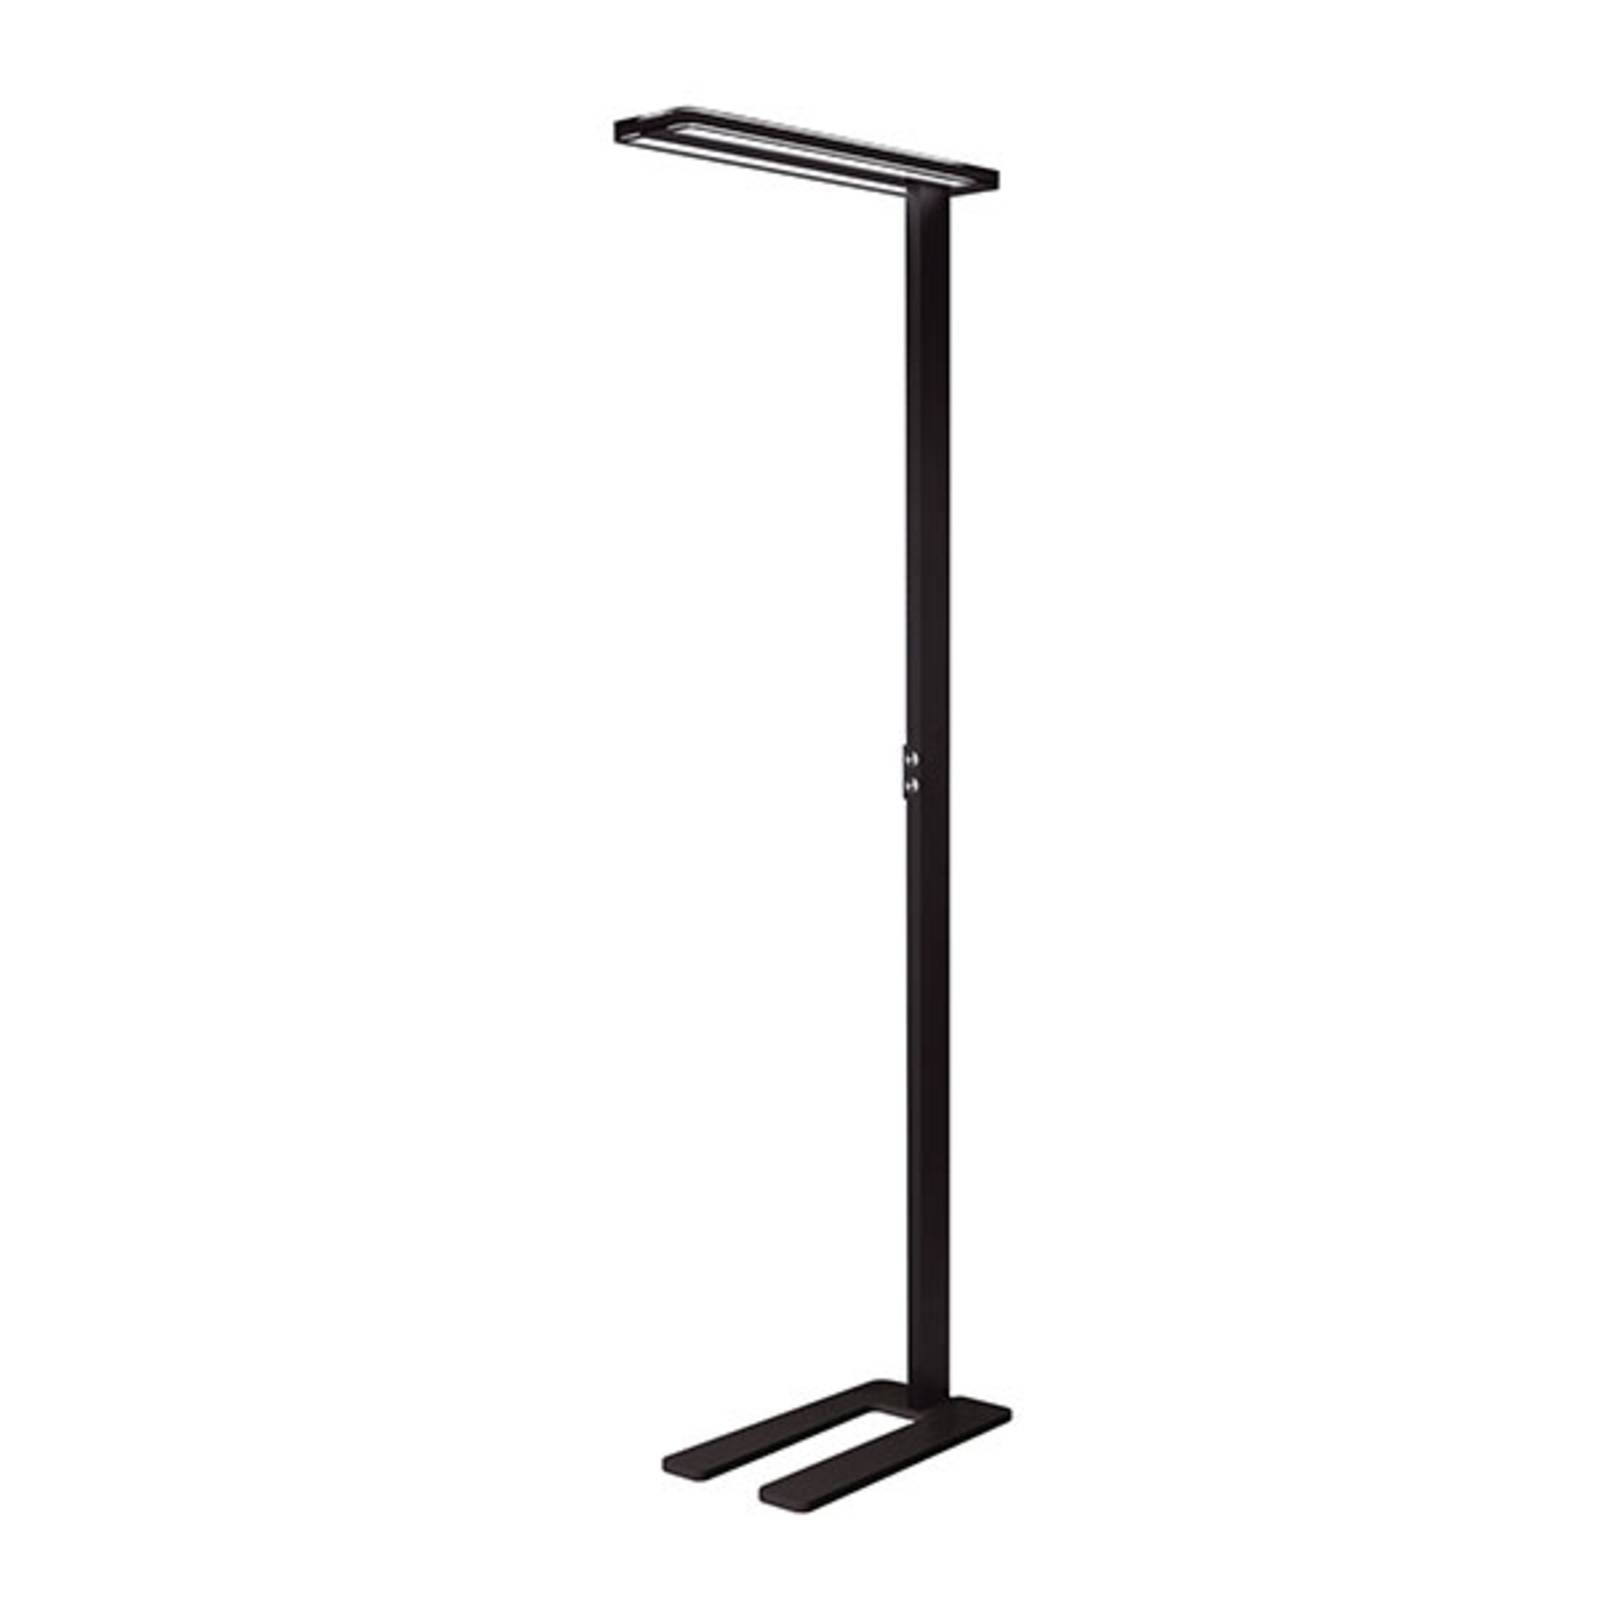 Image of Lampadaire LED Trentino II, dimmable, noir 4043544384591